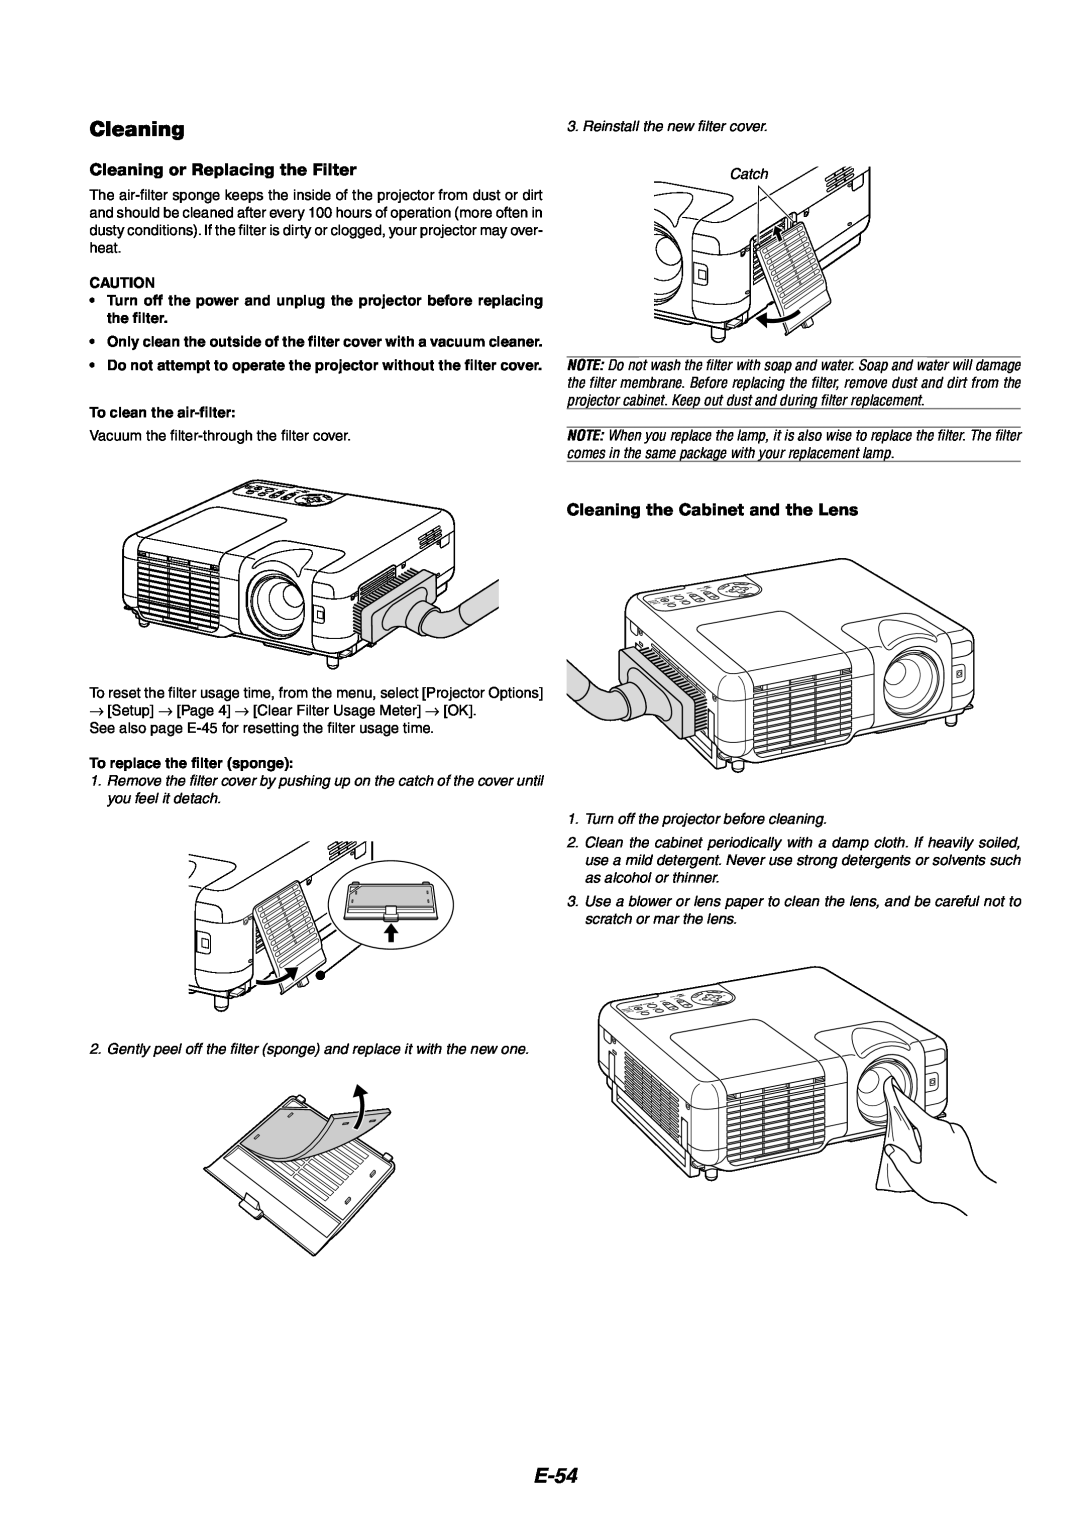 NEC MT1060 user manual E-54, Cleaning or Replacing the Filter, Cleaning the Cabinet and the Lens 